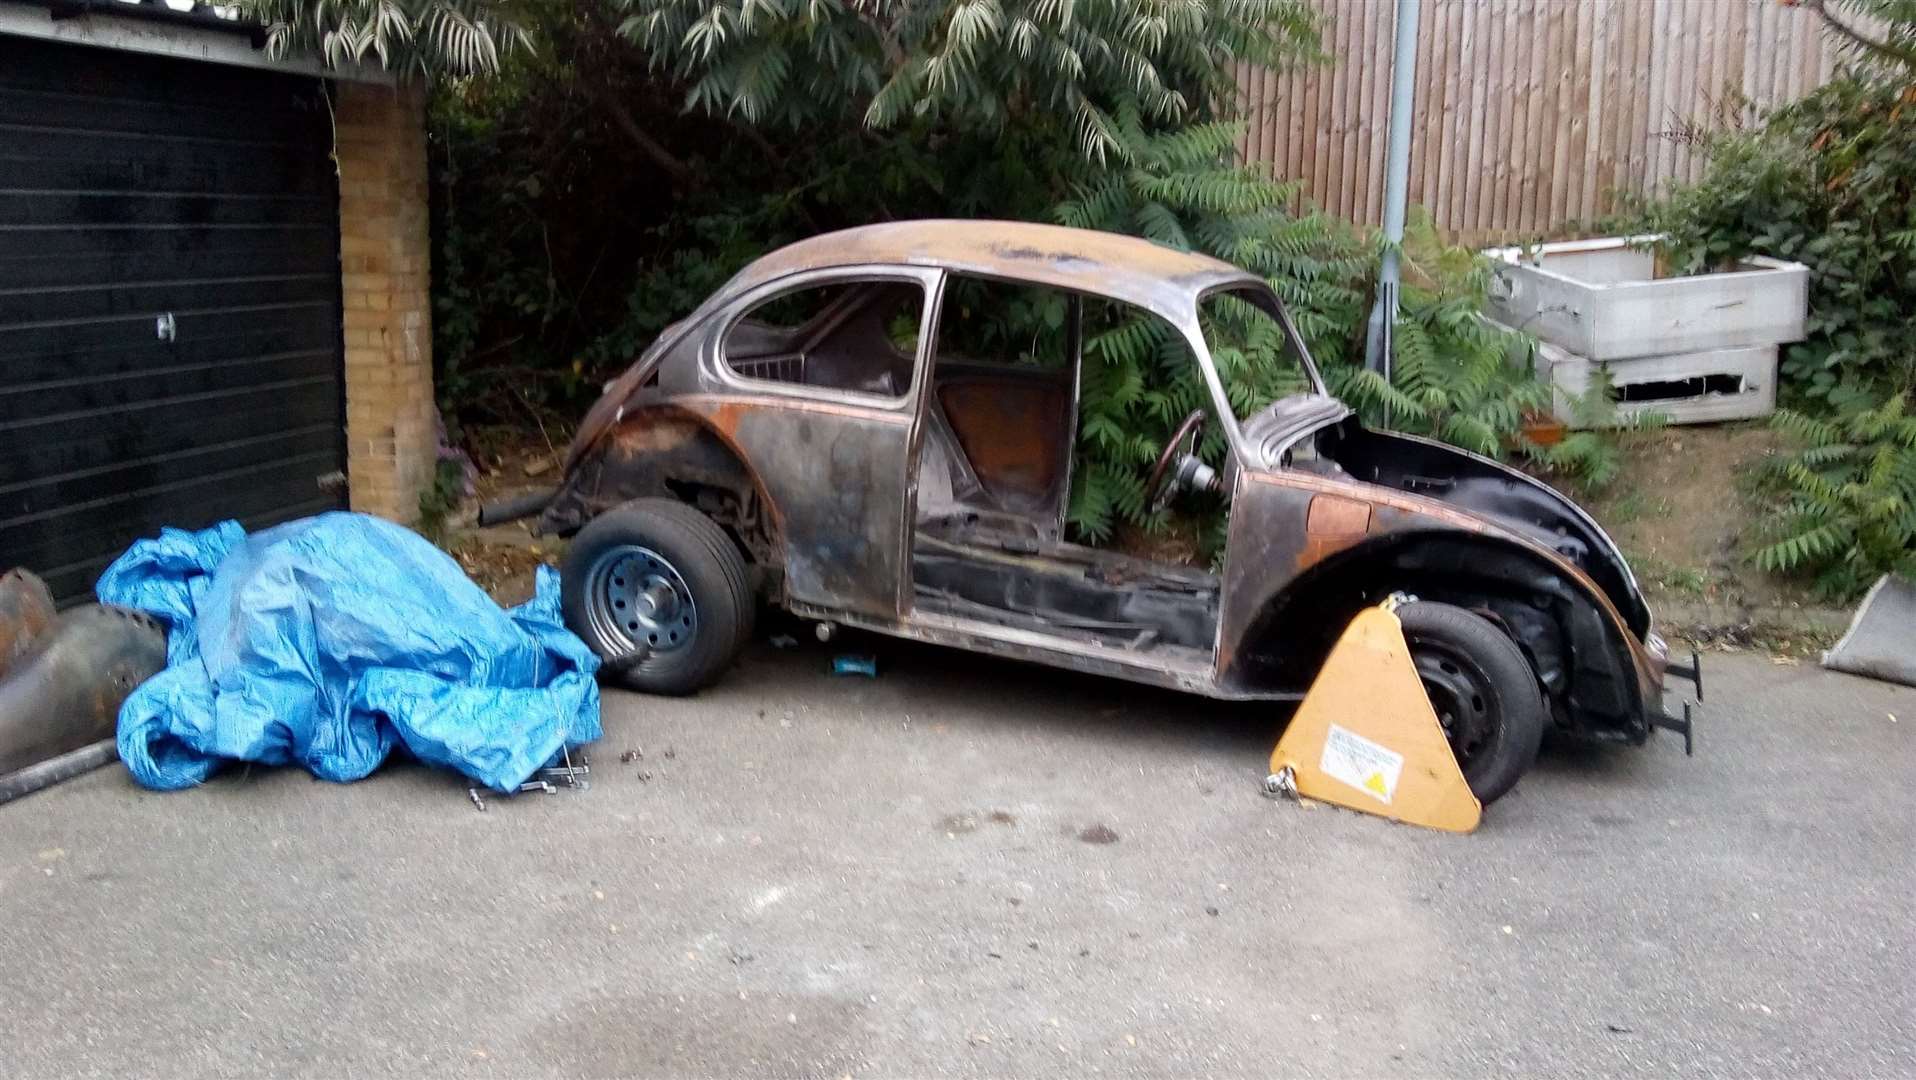 The VW Beetle was torched in September last year but has been completely rebuilt using the same chassis and same body